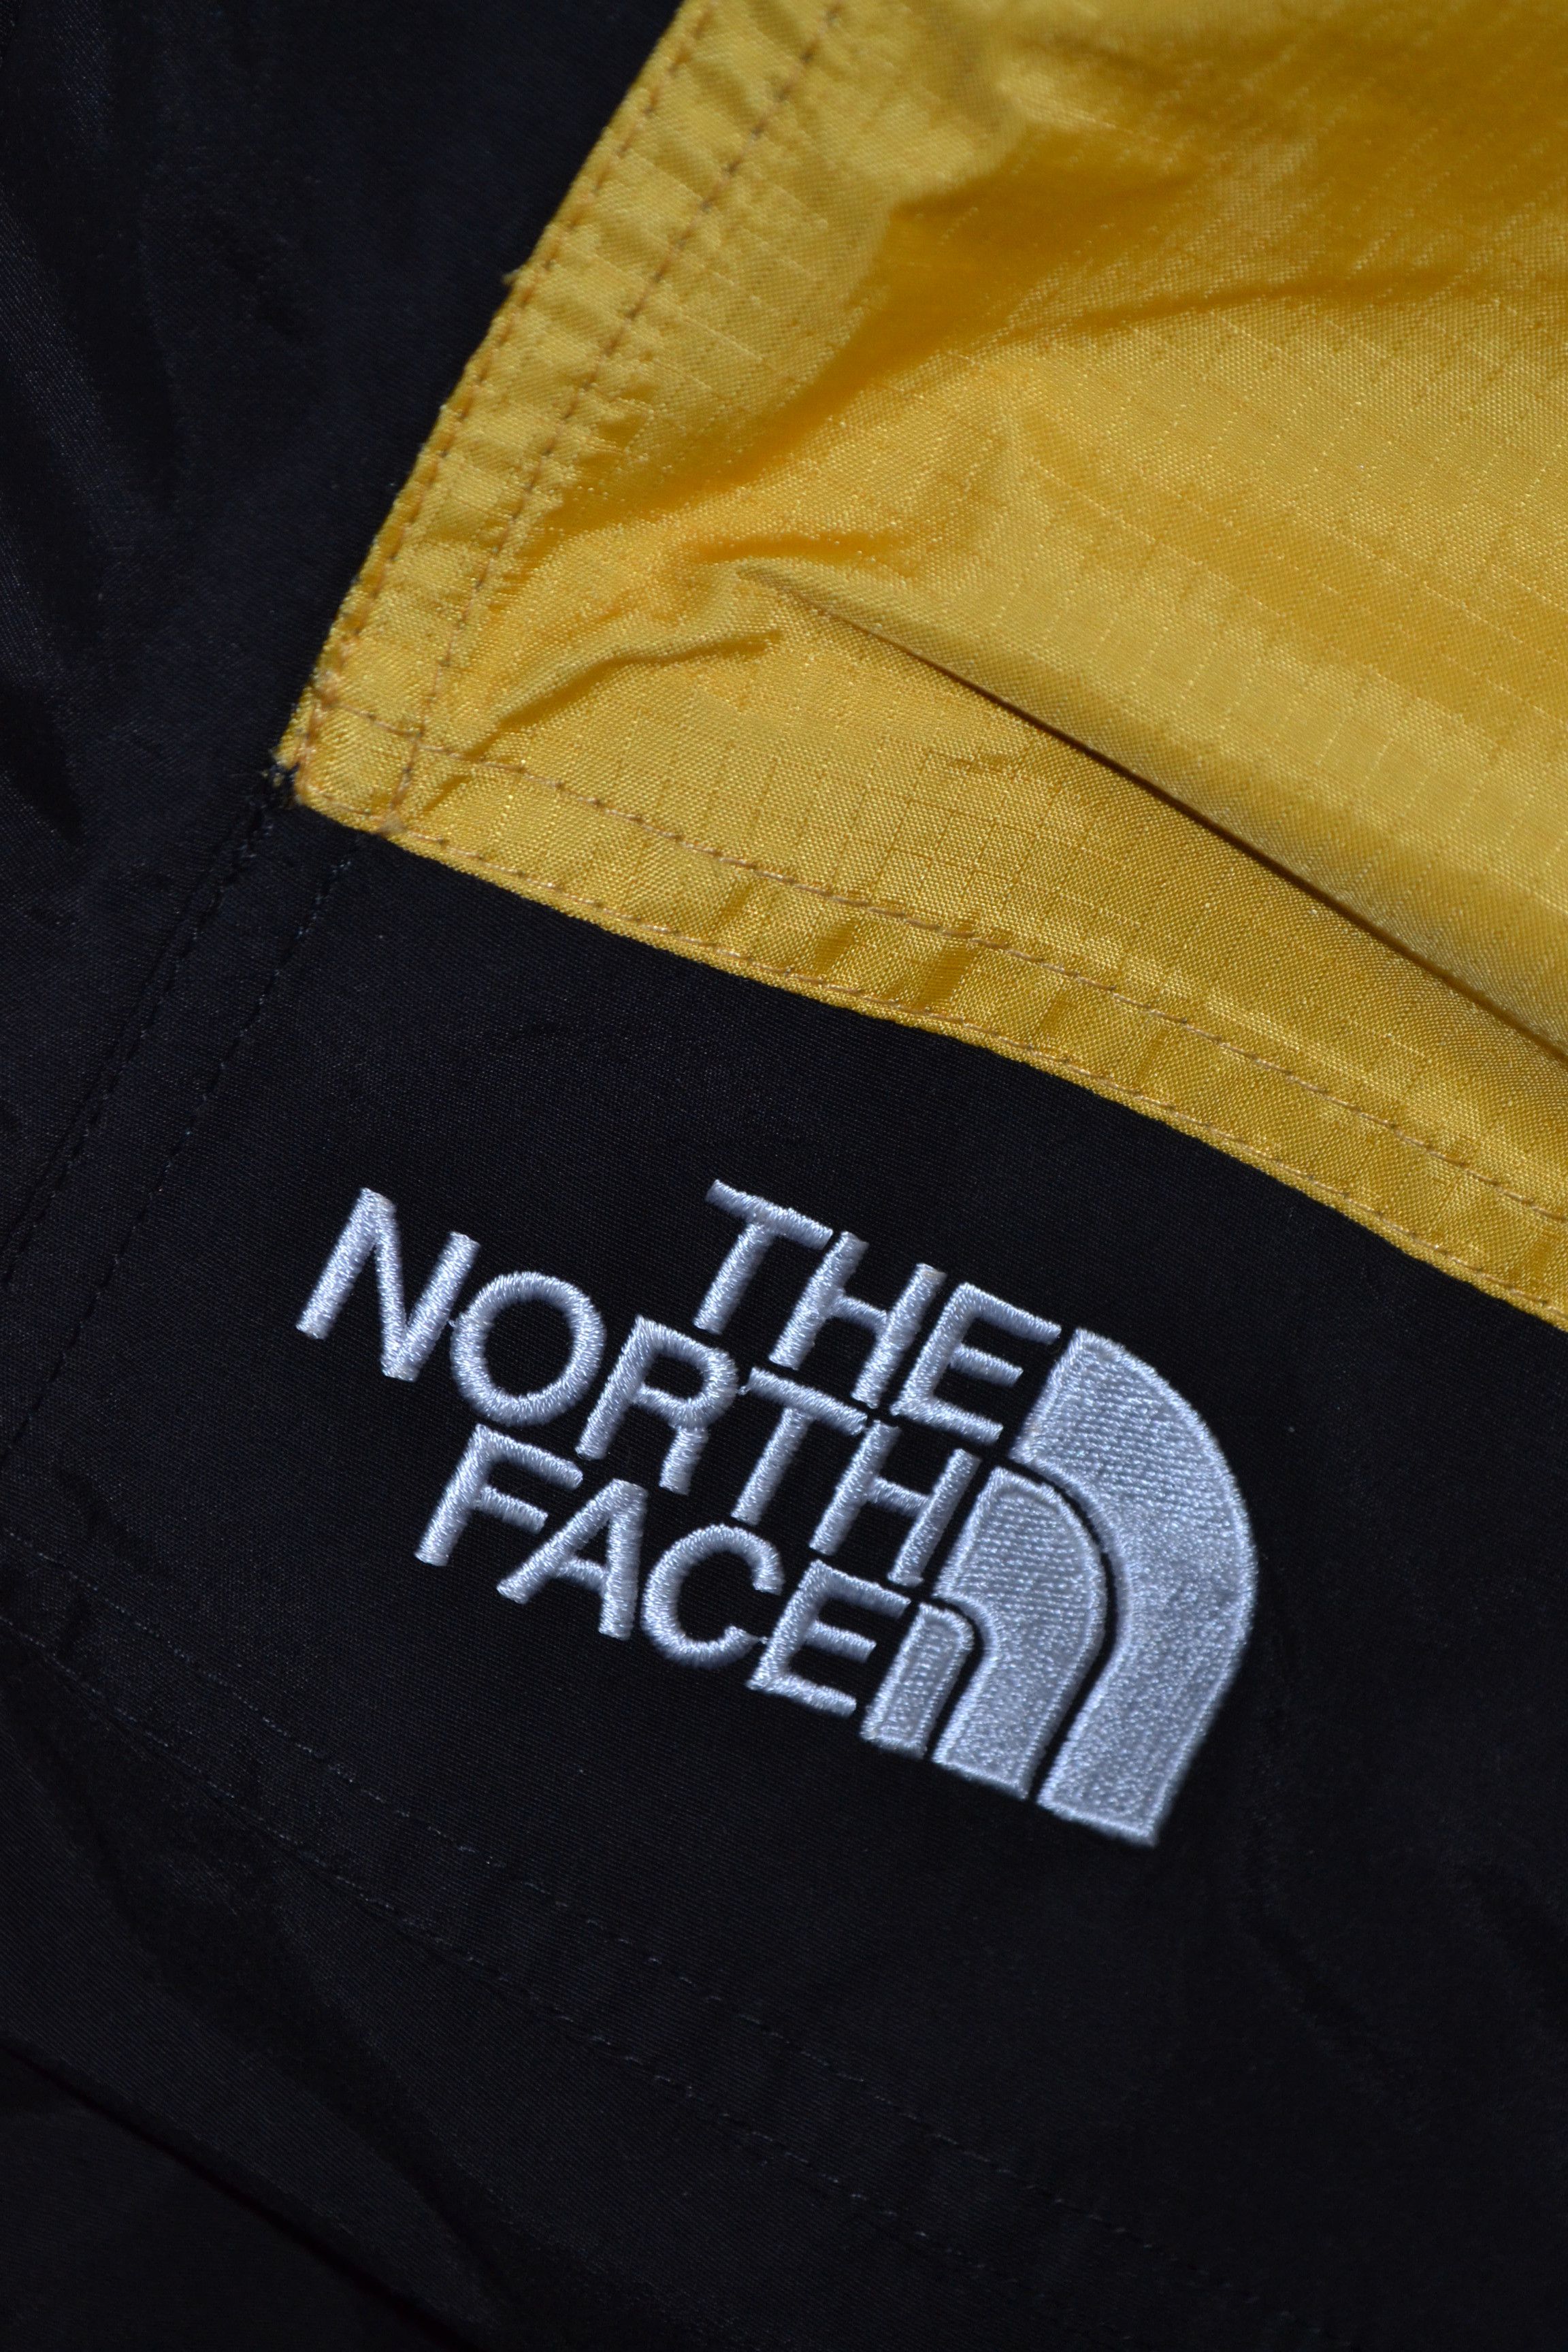 The North Face The North Face Vintage BIB XL Overall Yellow Ripstop Gore-tex Deadstock Winter Hardshell Suit Rare Supreme 90s piece Karakoram Salopette Size US 36 / EU 52 - 4 Thumbnail